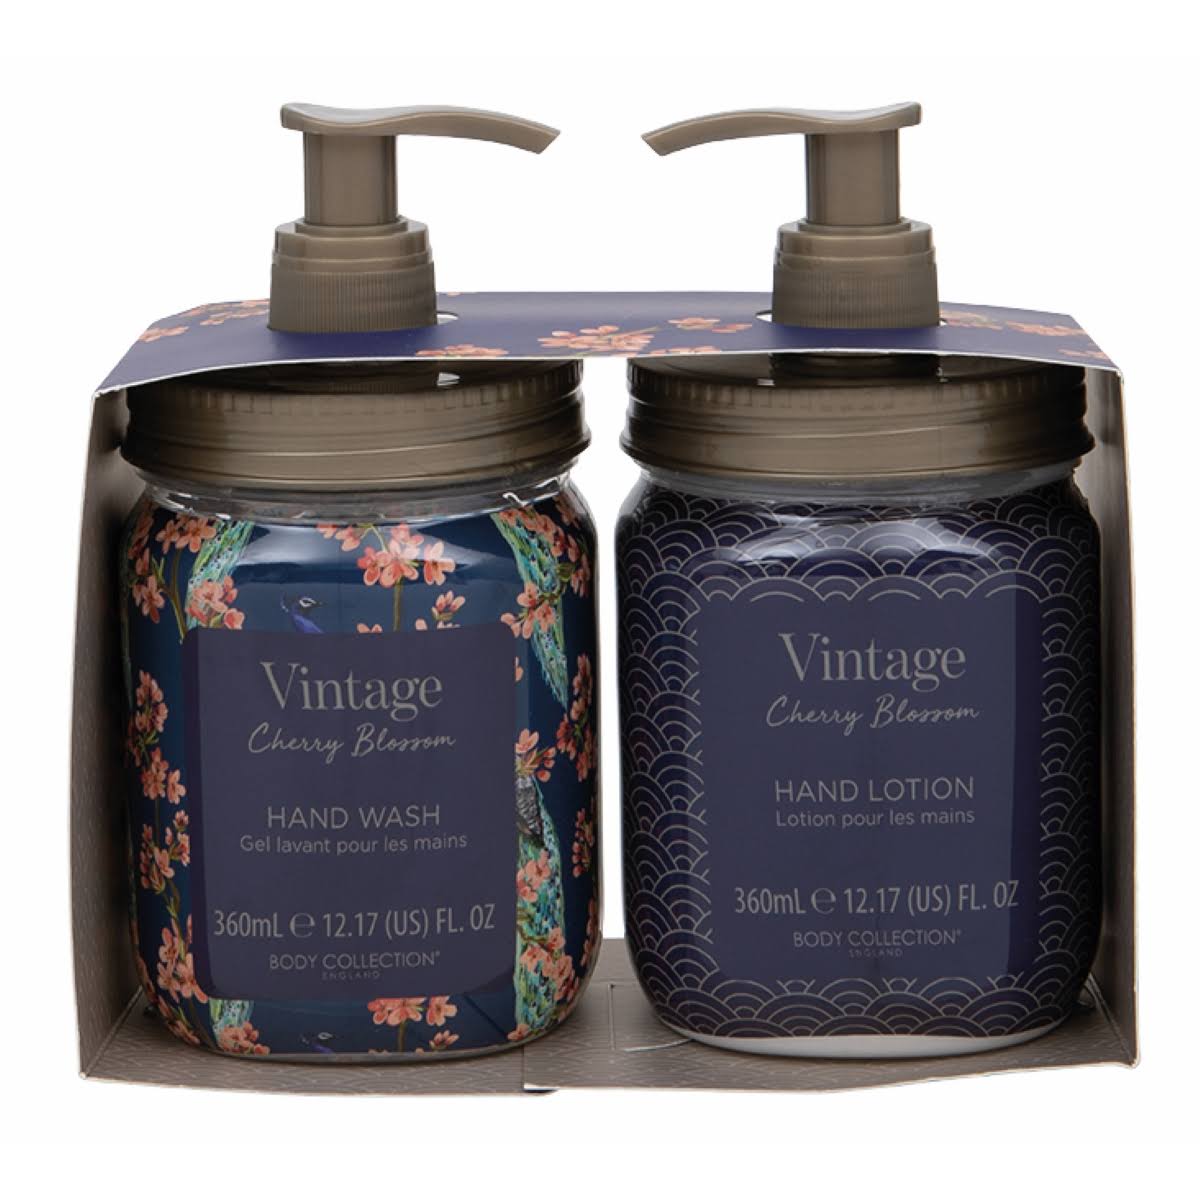 Vintage Hand Wash + Hand Lotion Duo Set